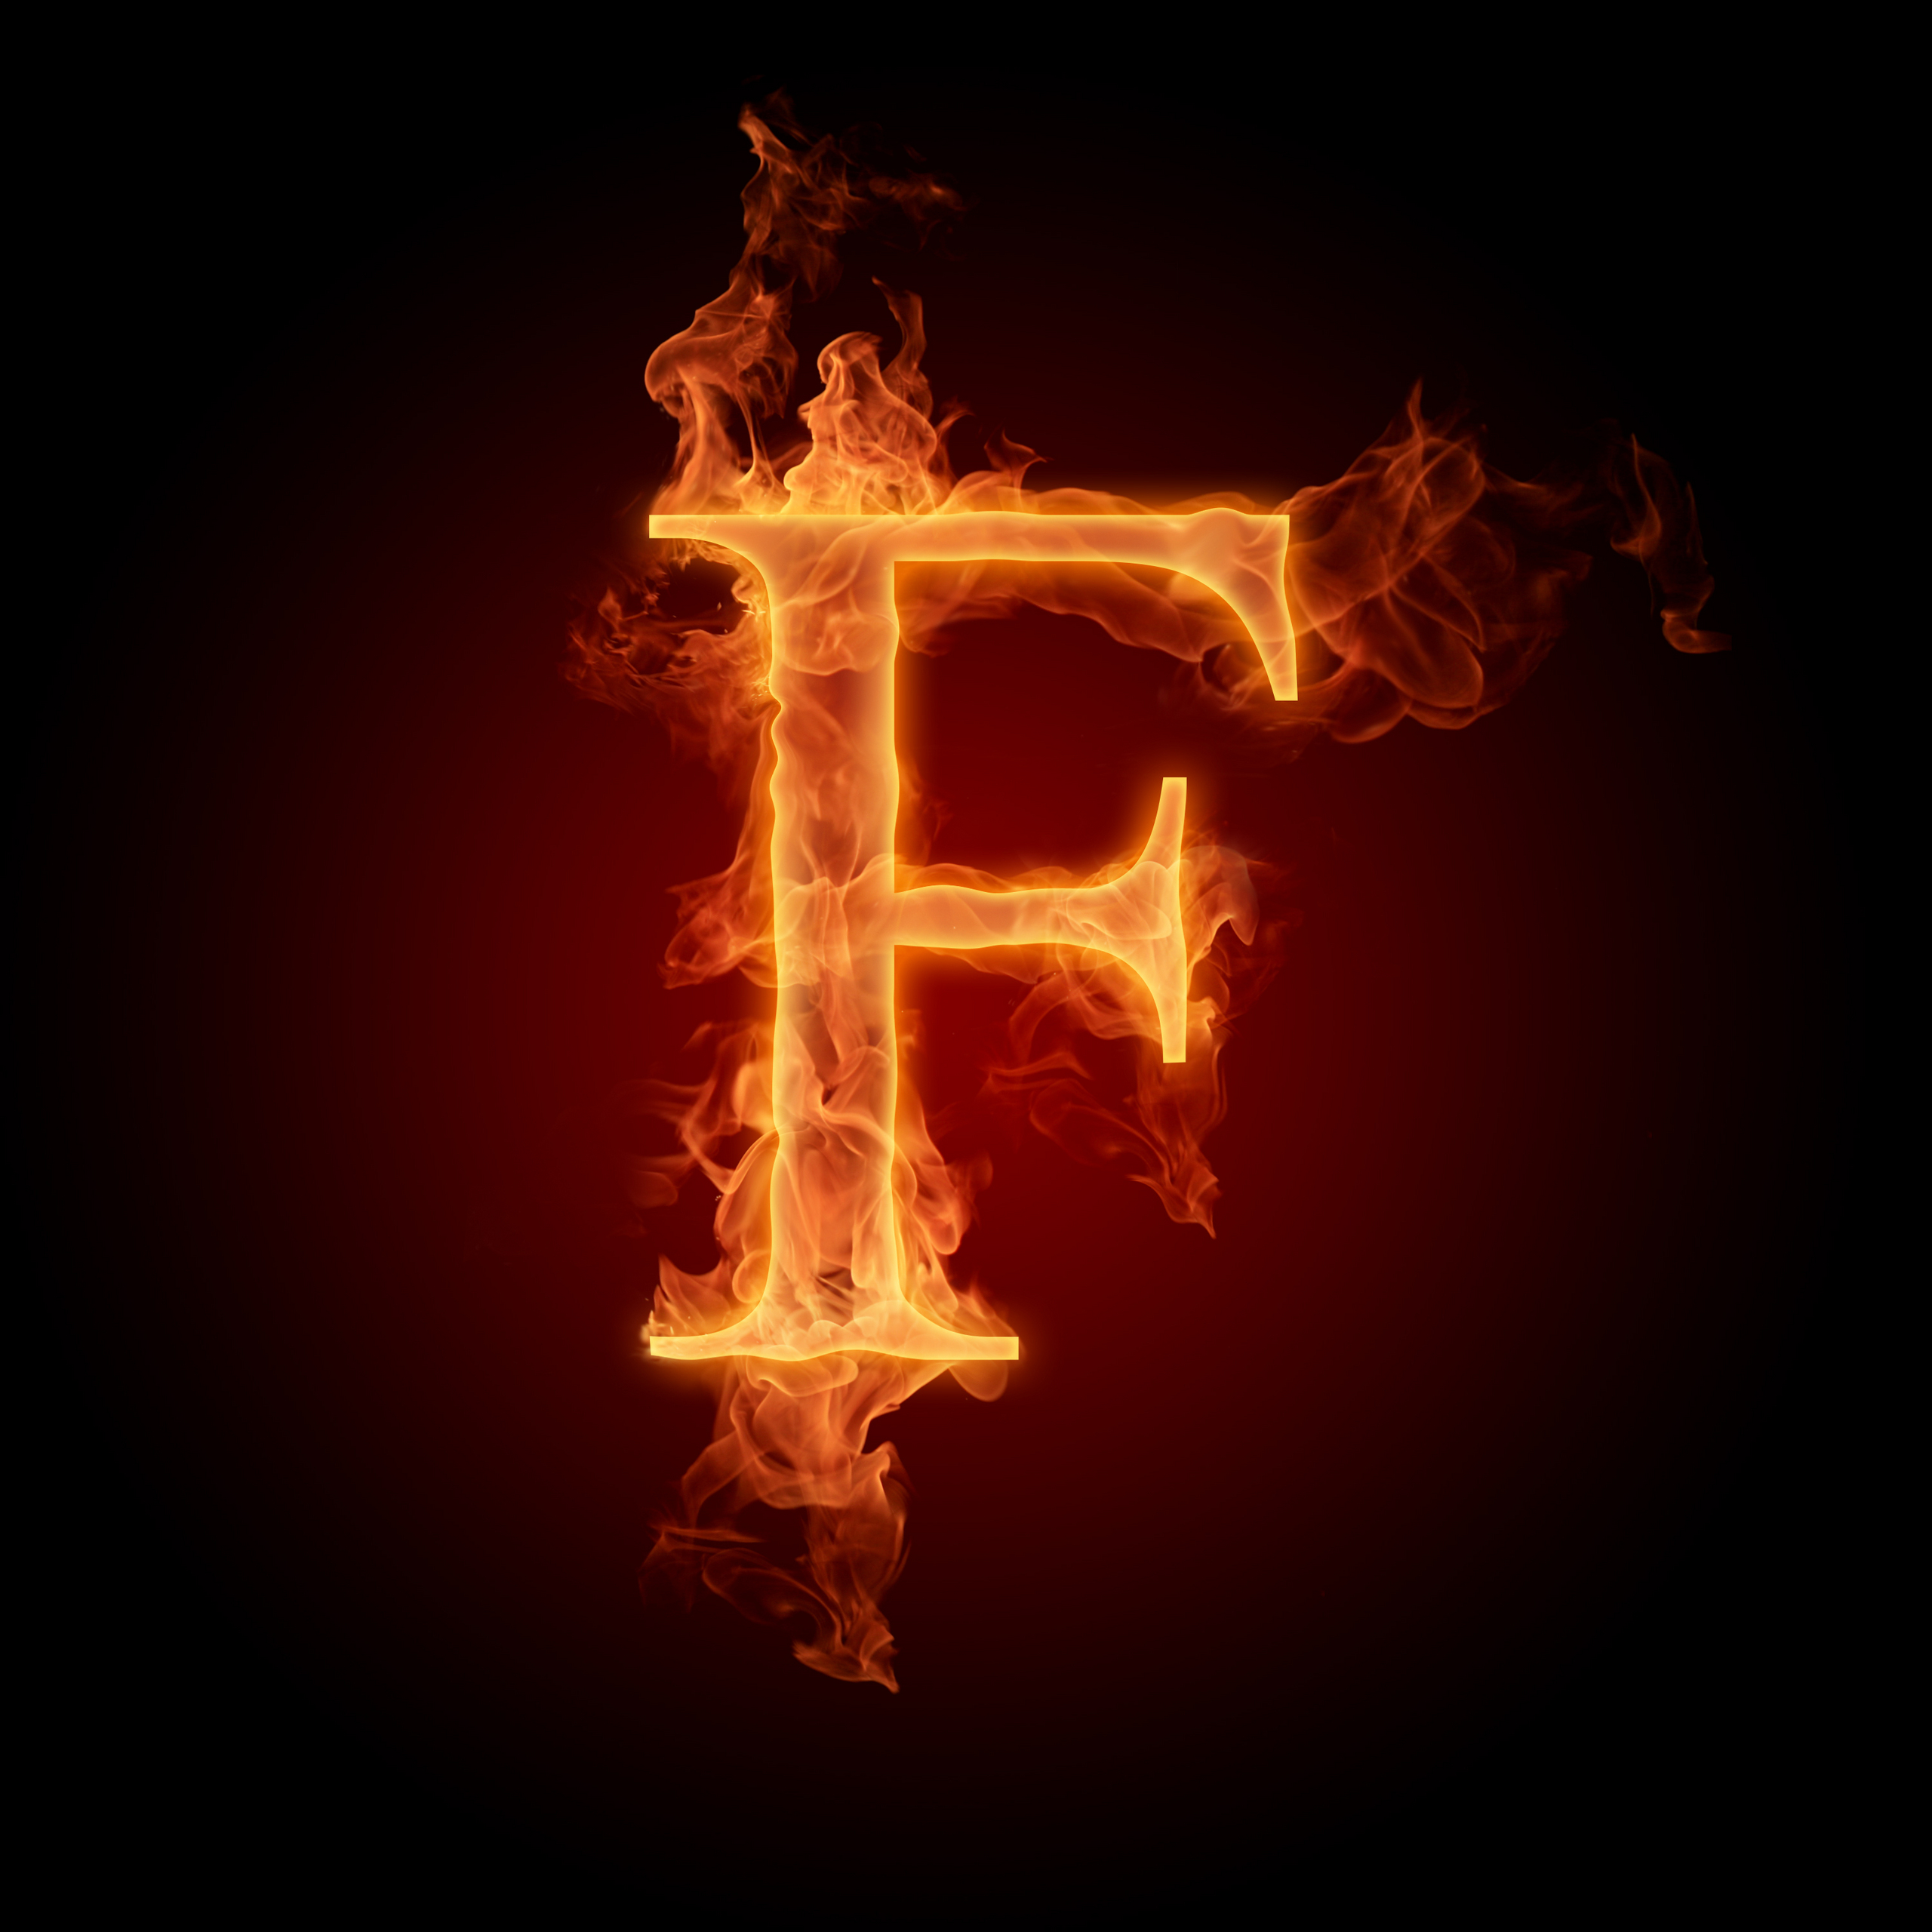 The Letter F Photo